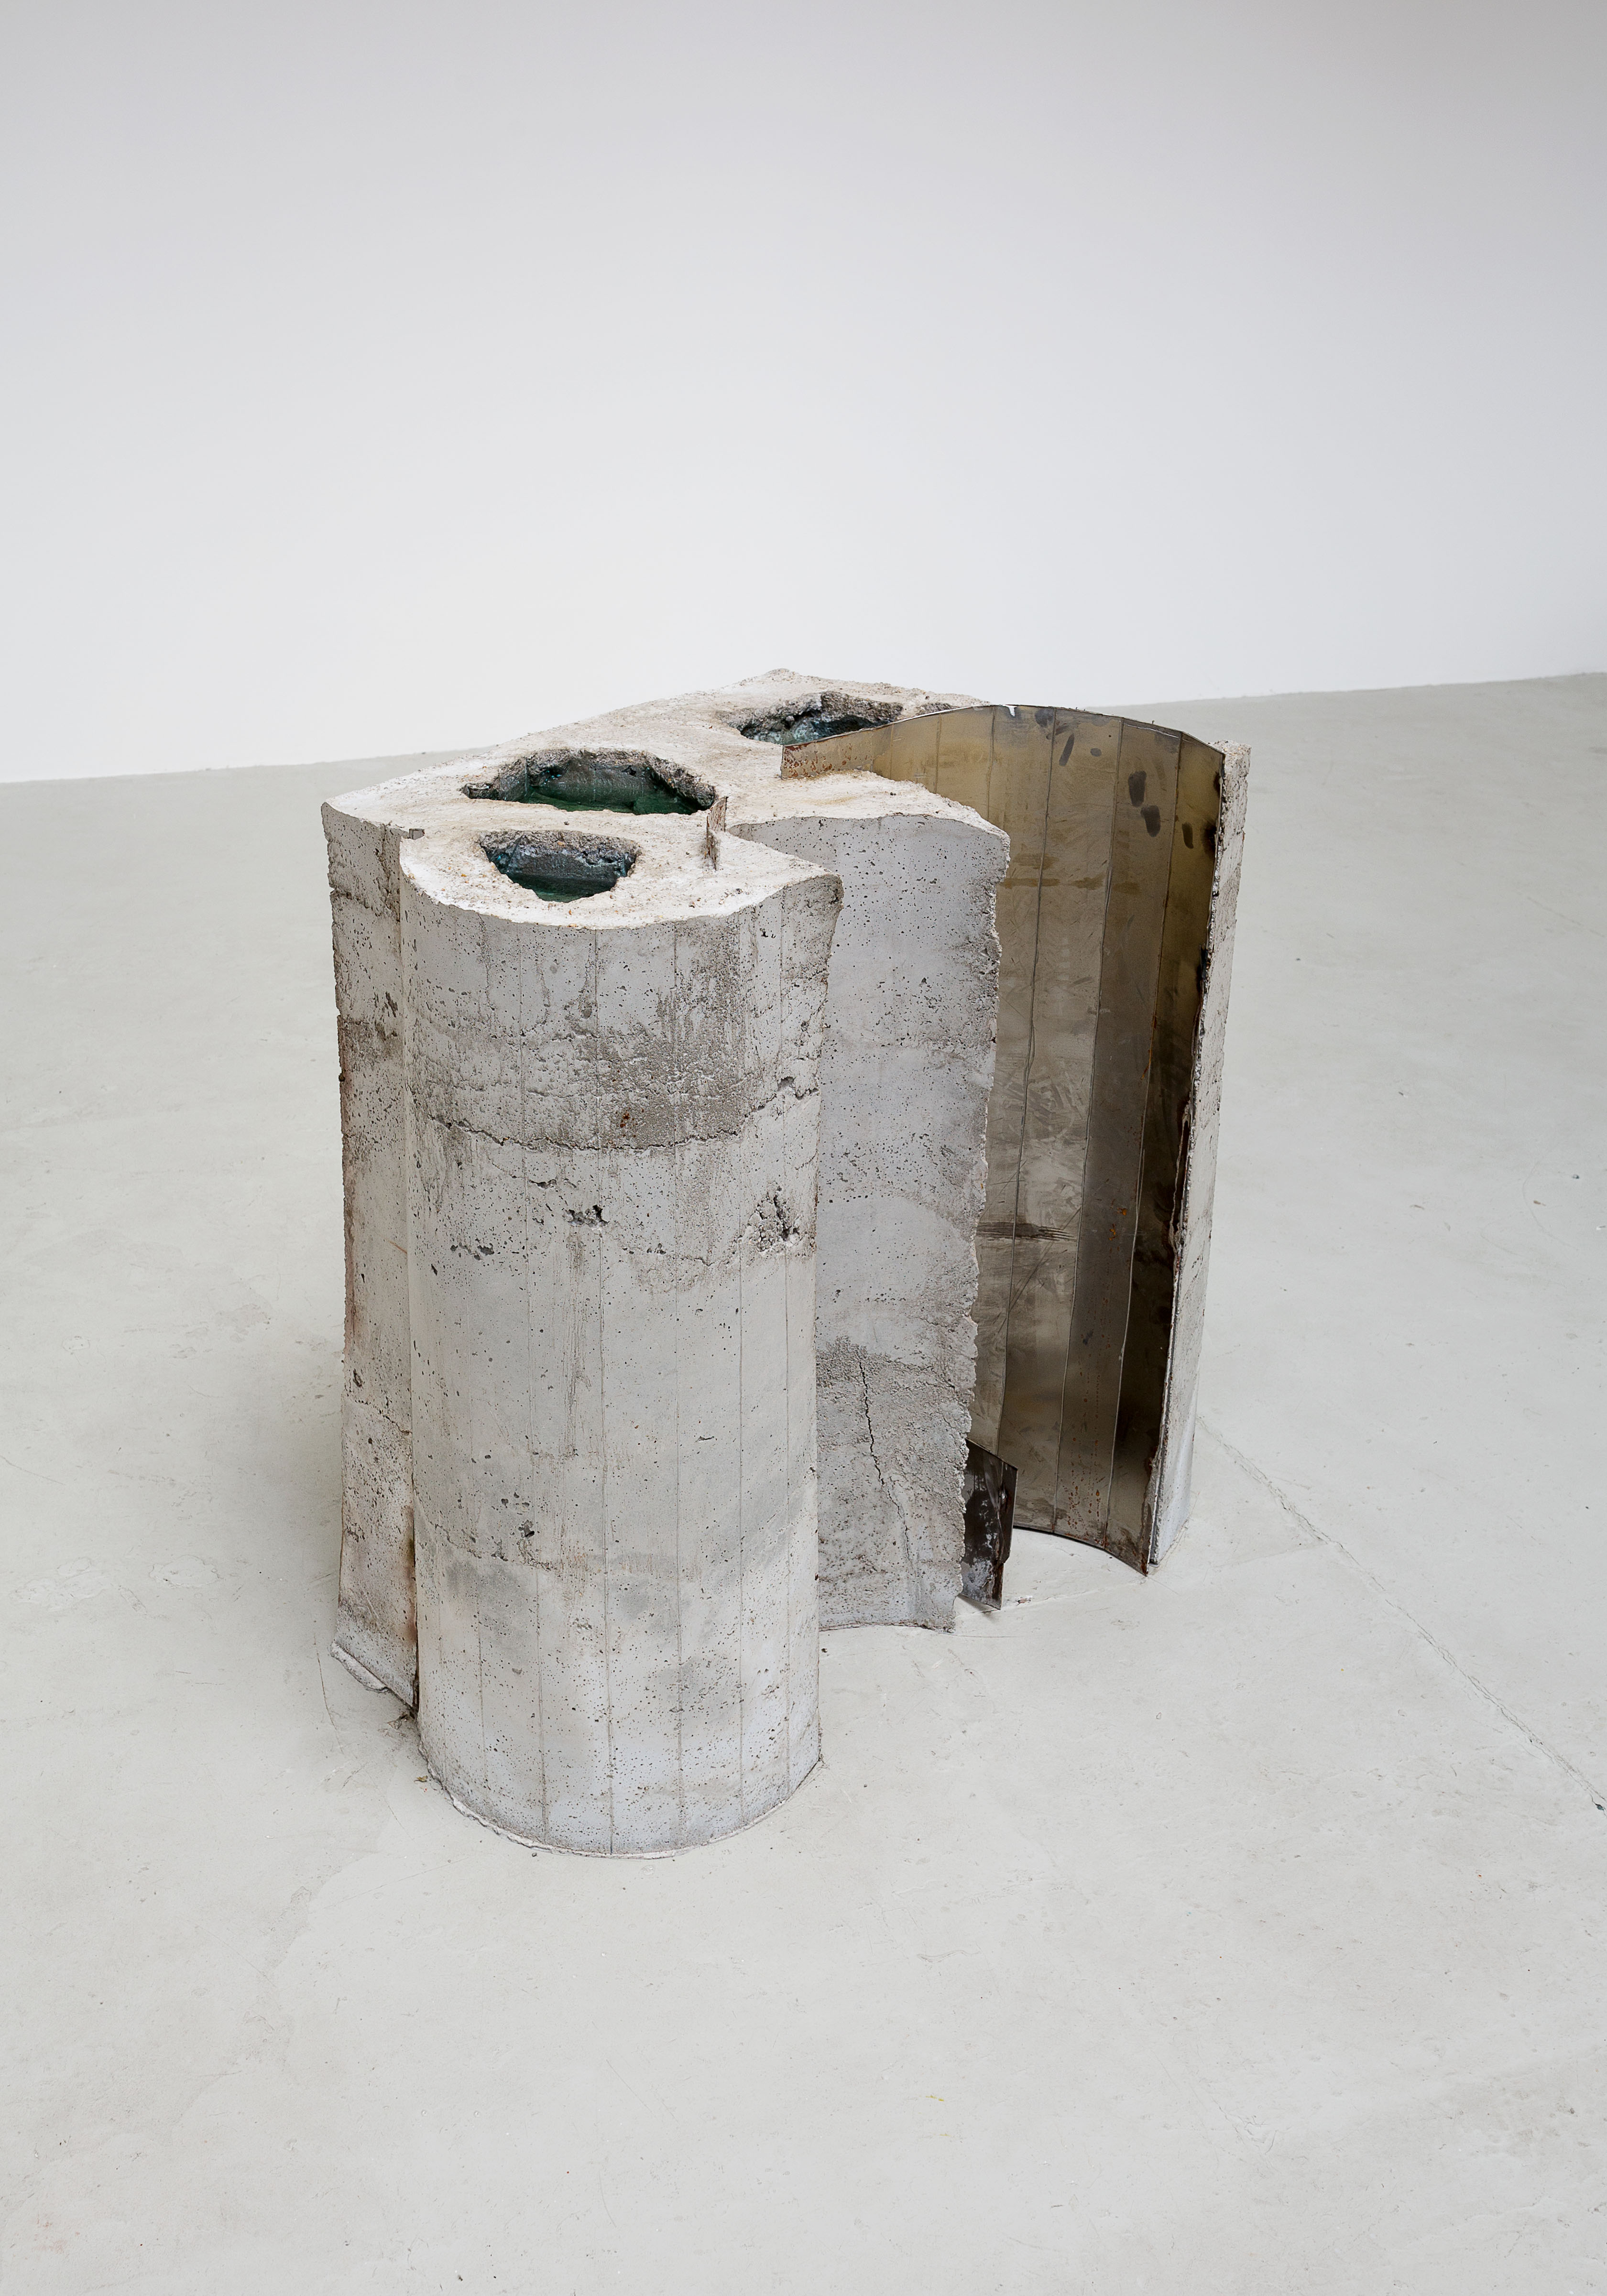 Tiril Hasselknippe, Balcony (supplies), 2015, concrete, steel, water, food coloring, 35.4h x 35.4w x 20.5d in.